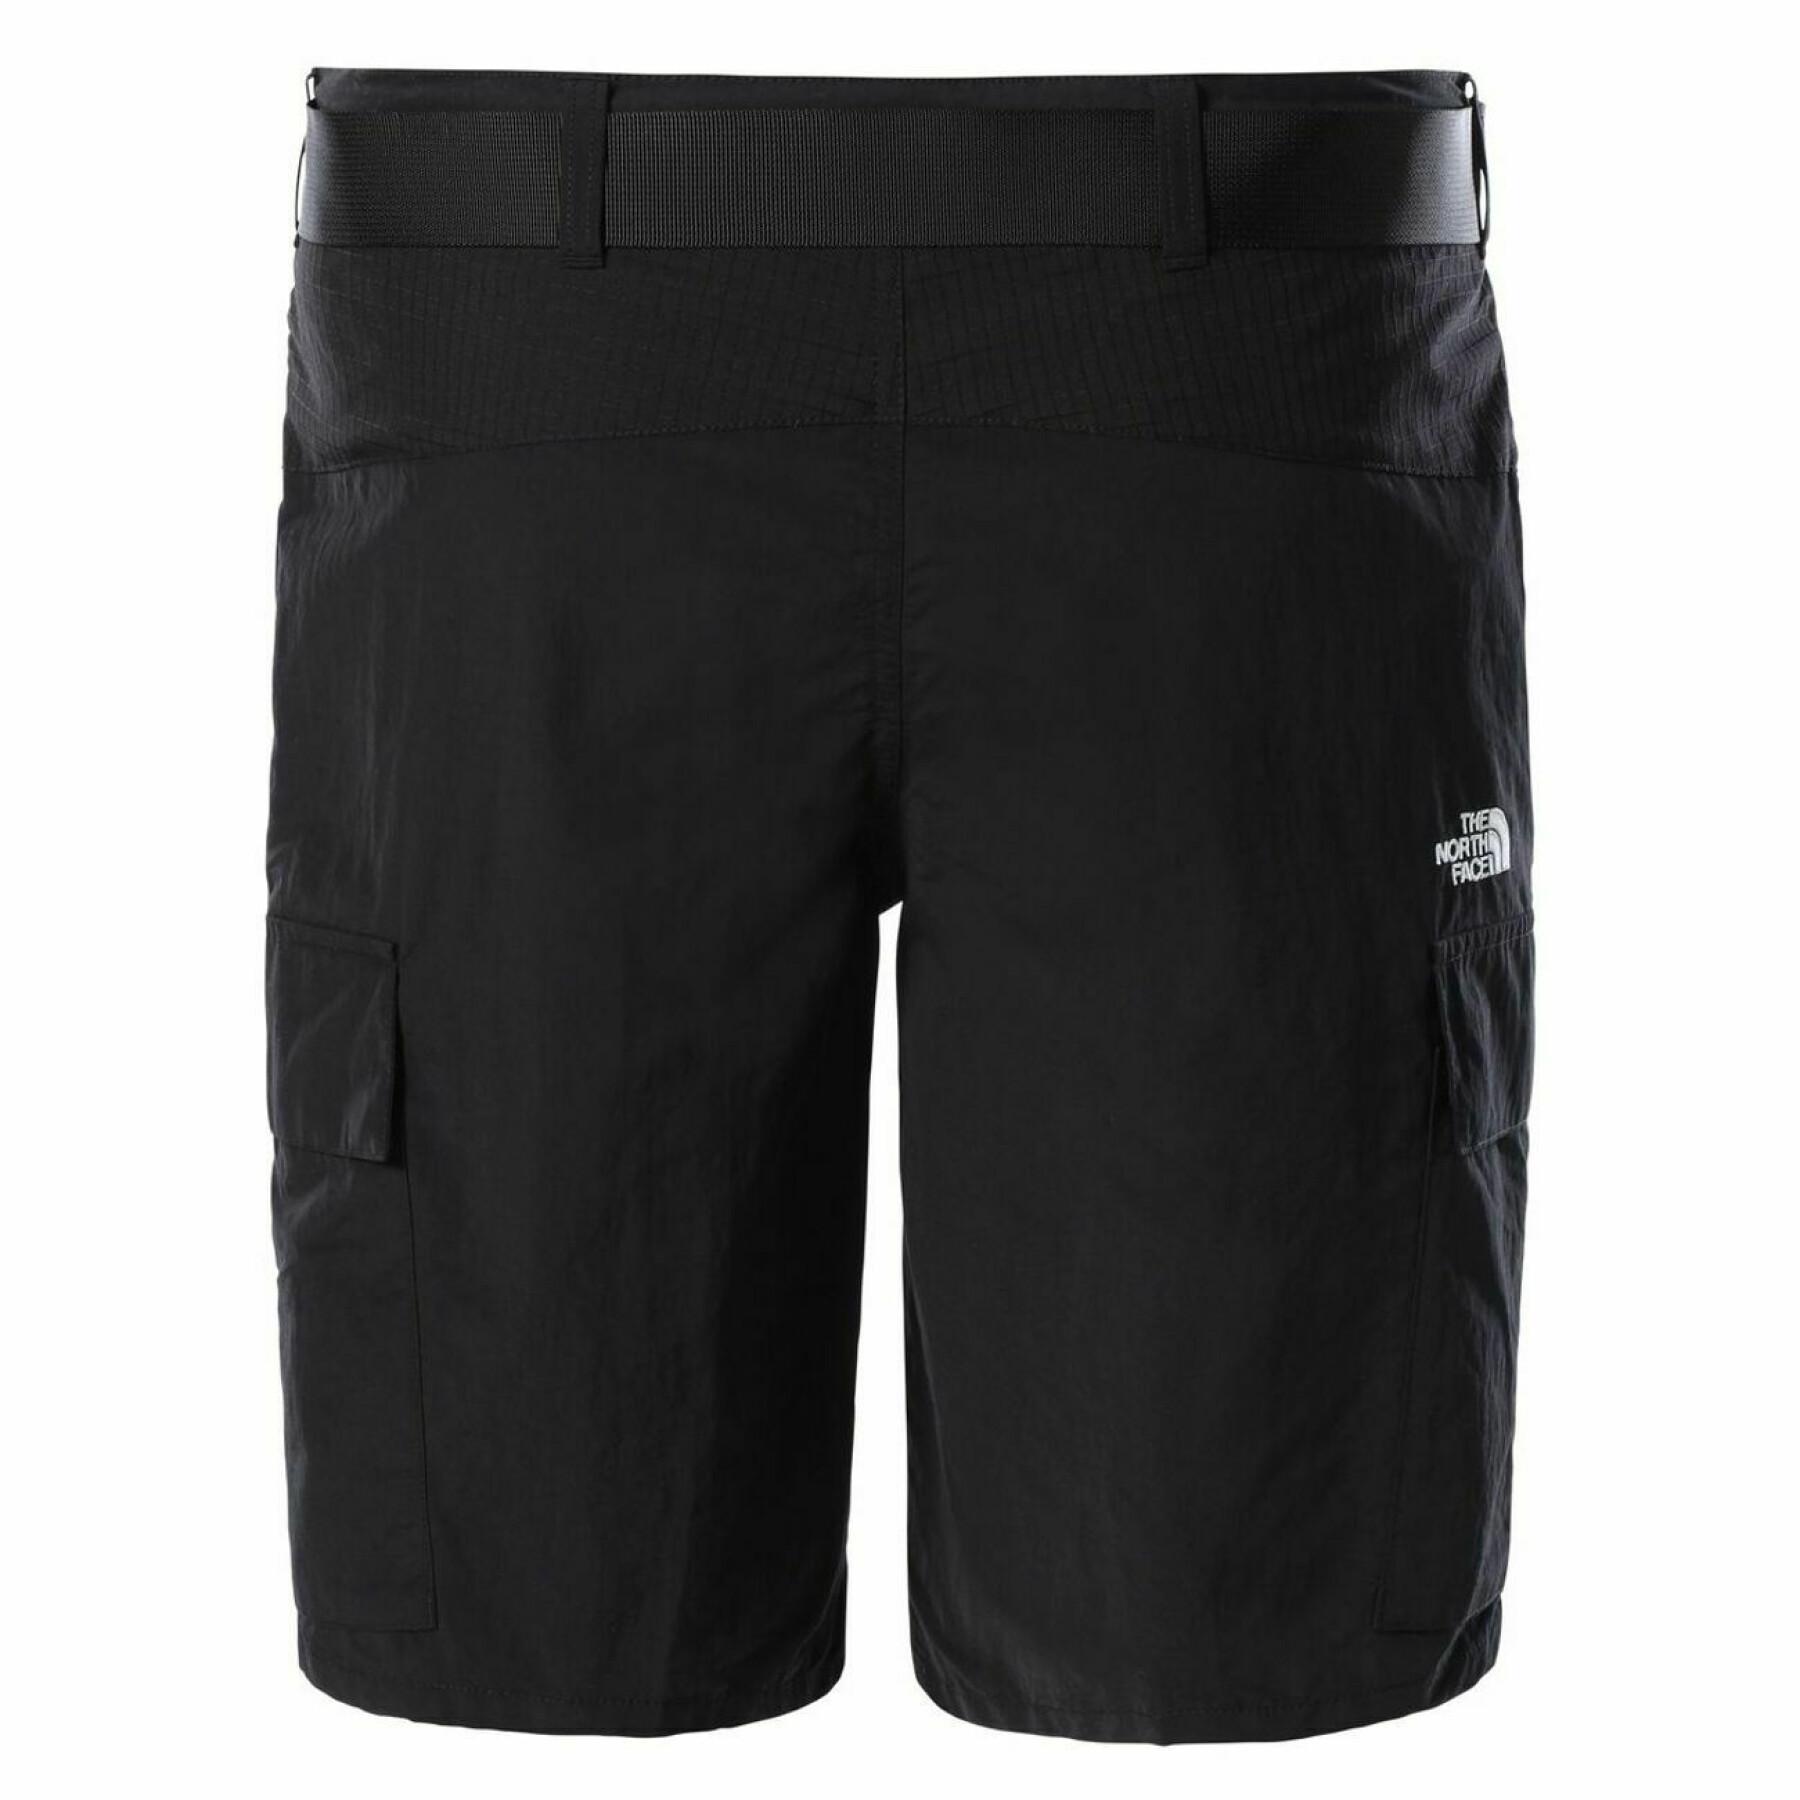 Curta The North Face Utility